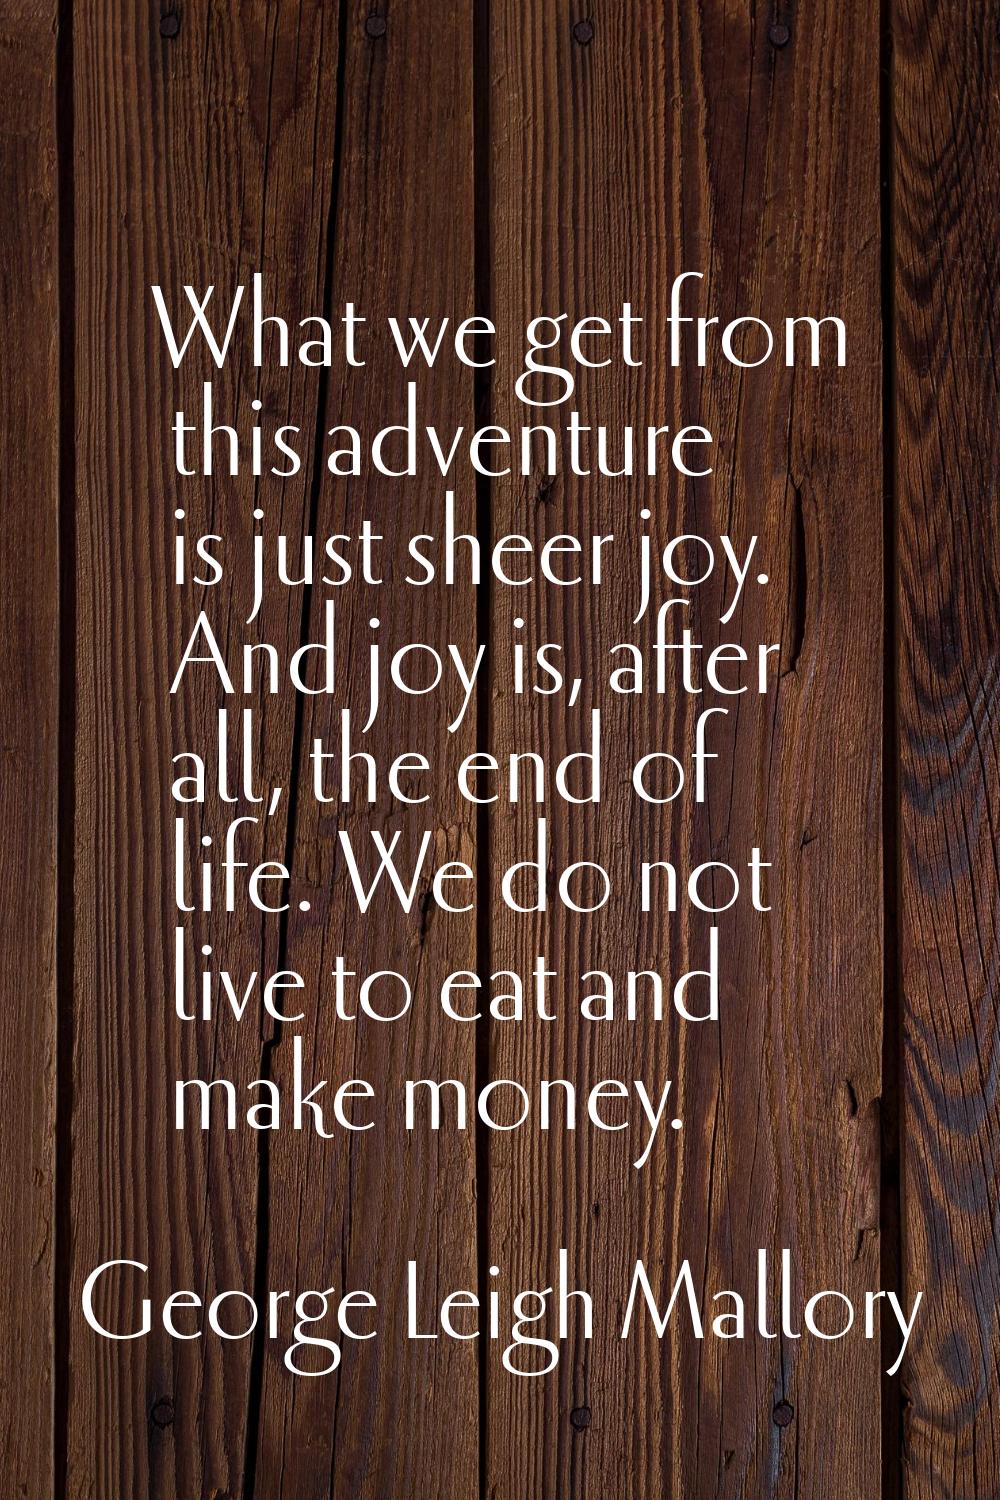 What we get from this adventure is just sheer joy. And joy is, after all, the end of life. We do no